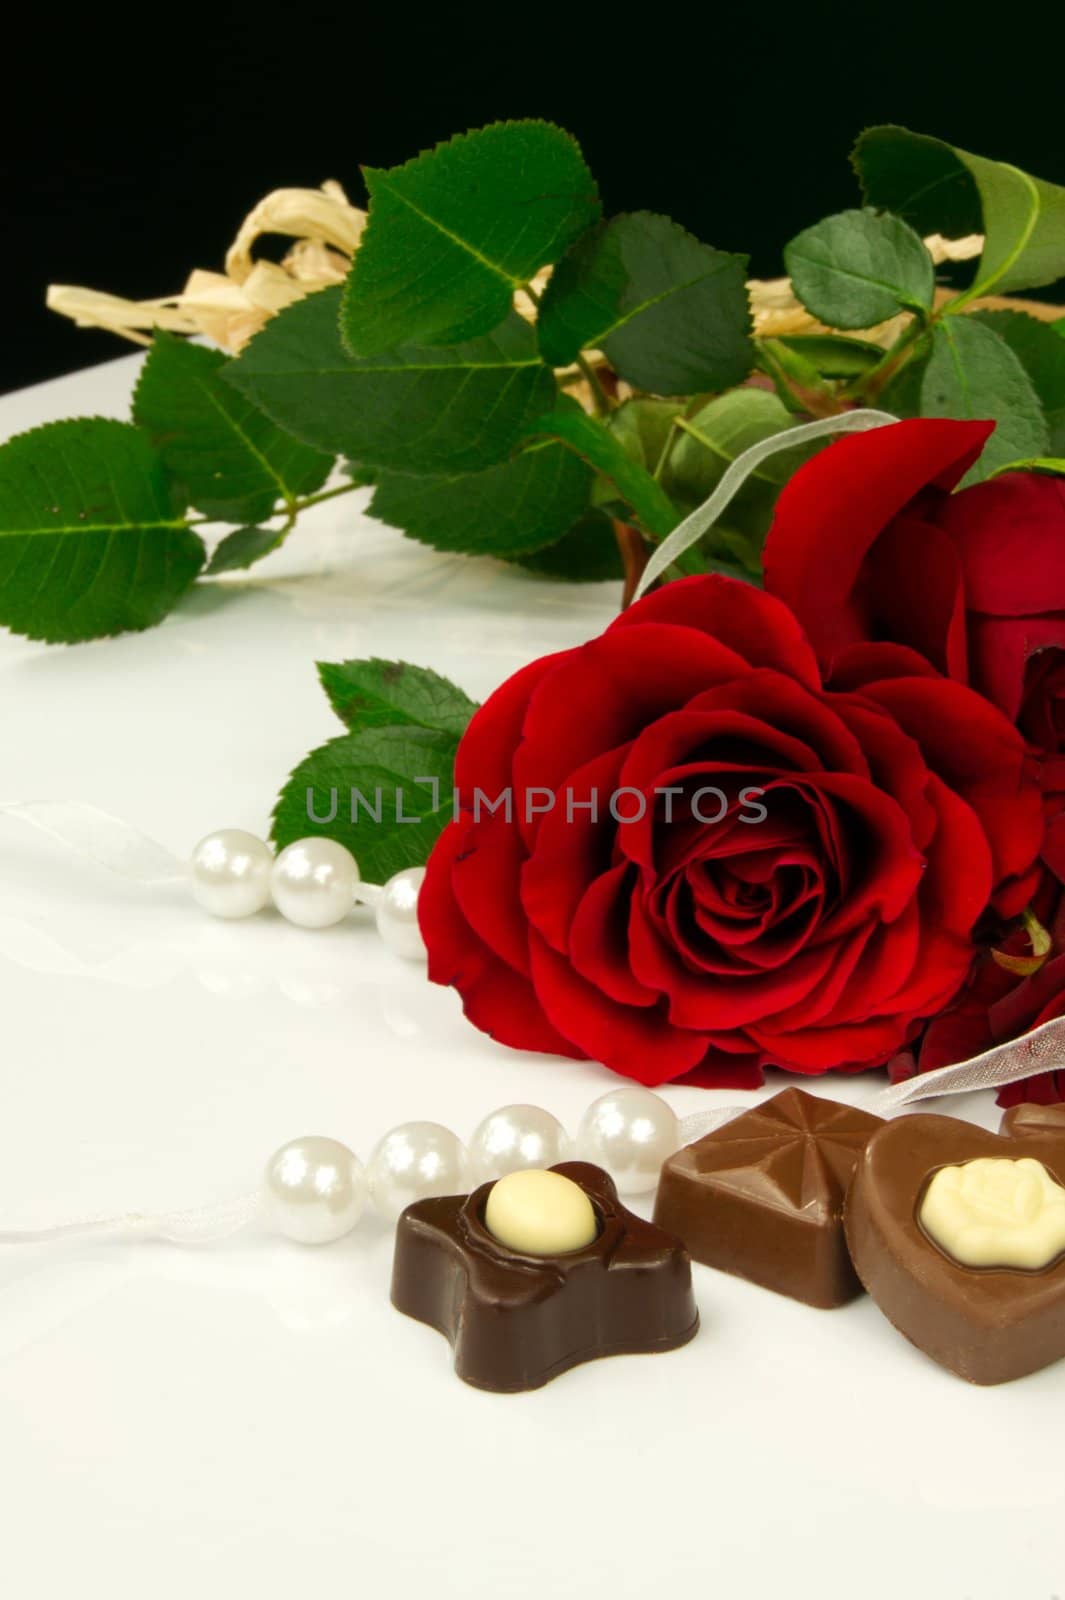 Rose, pearls and chocolate. Traditional beauty valentine composi by simpson33